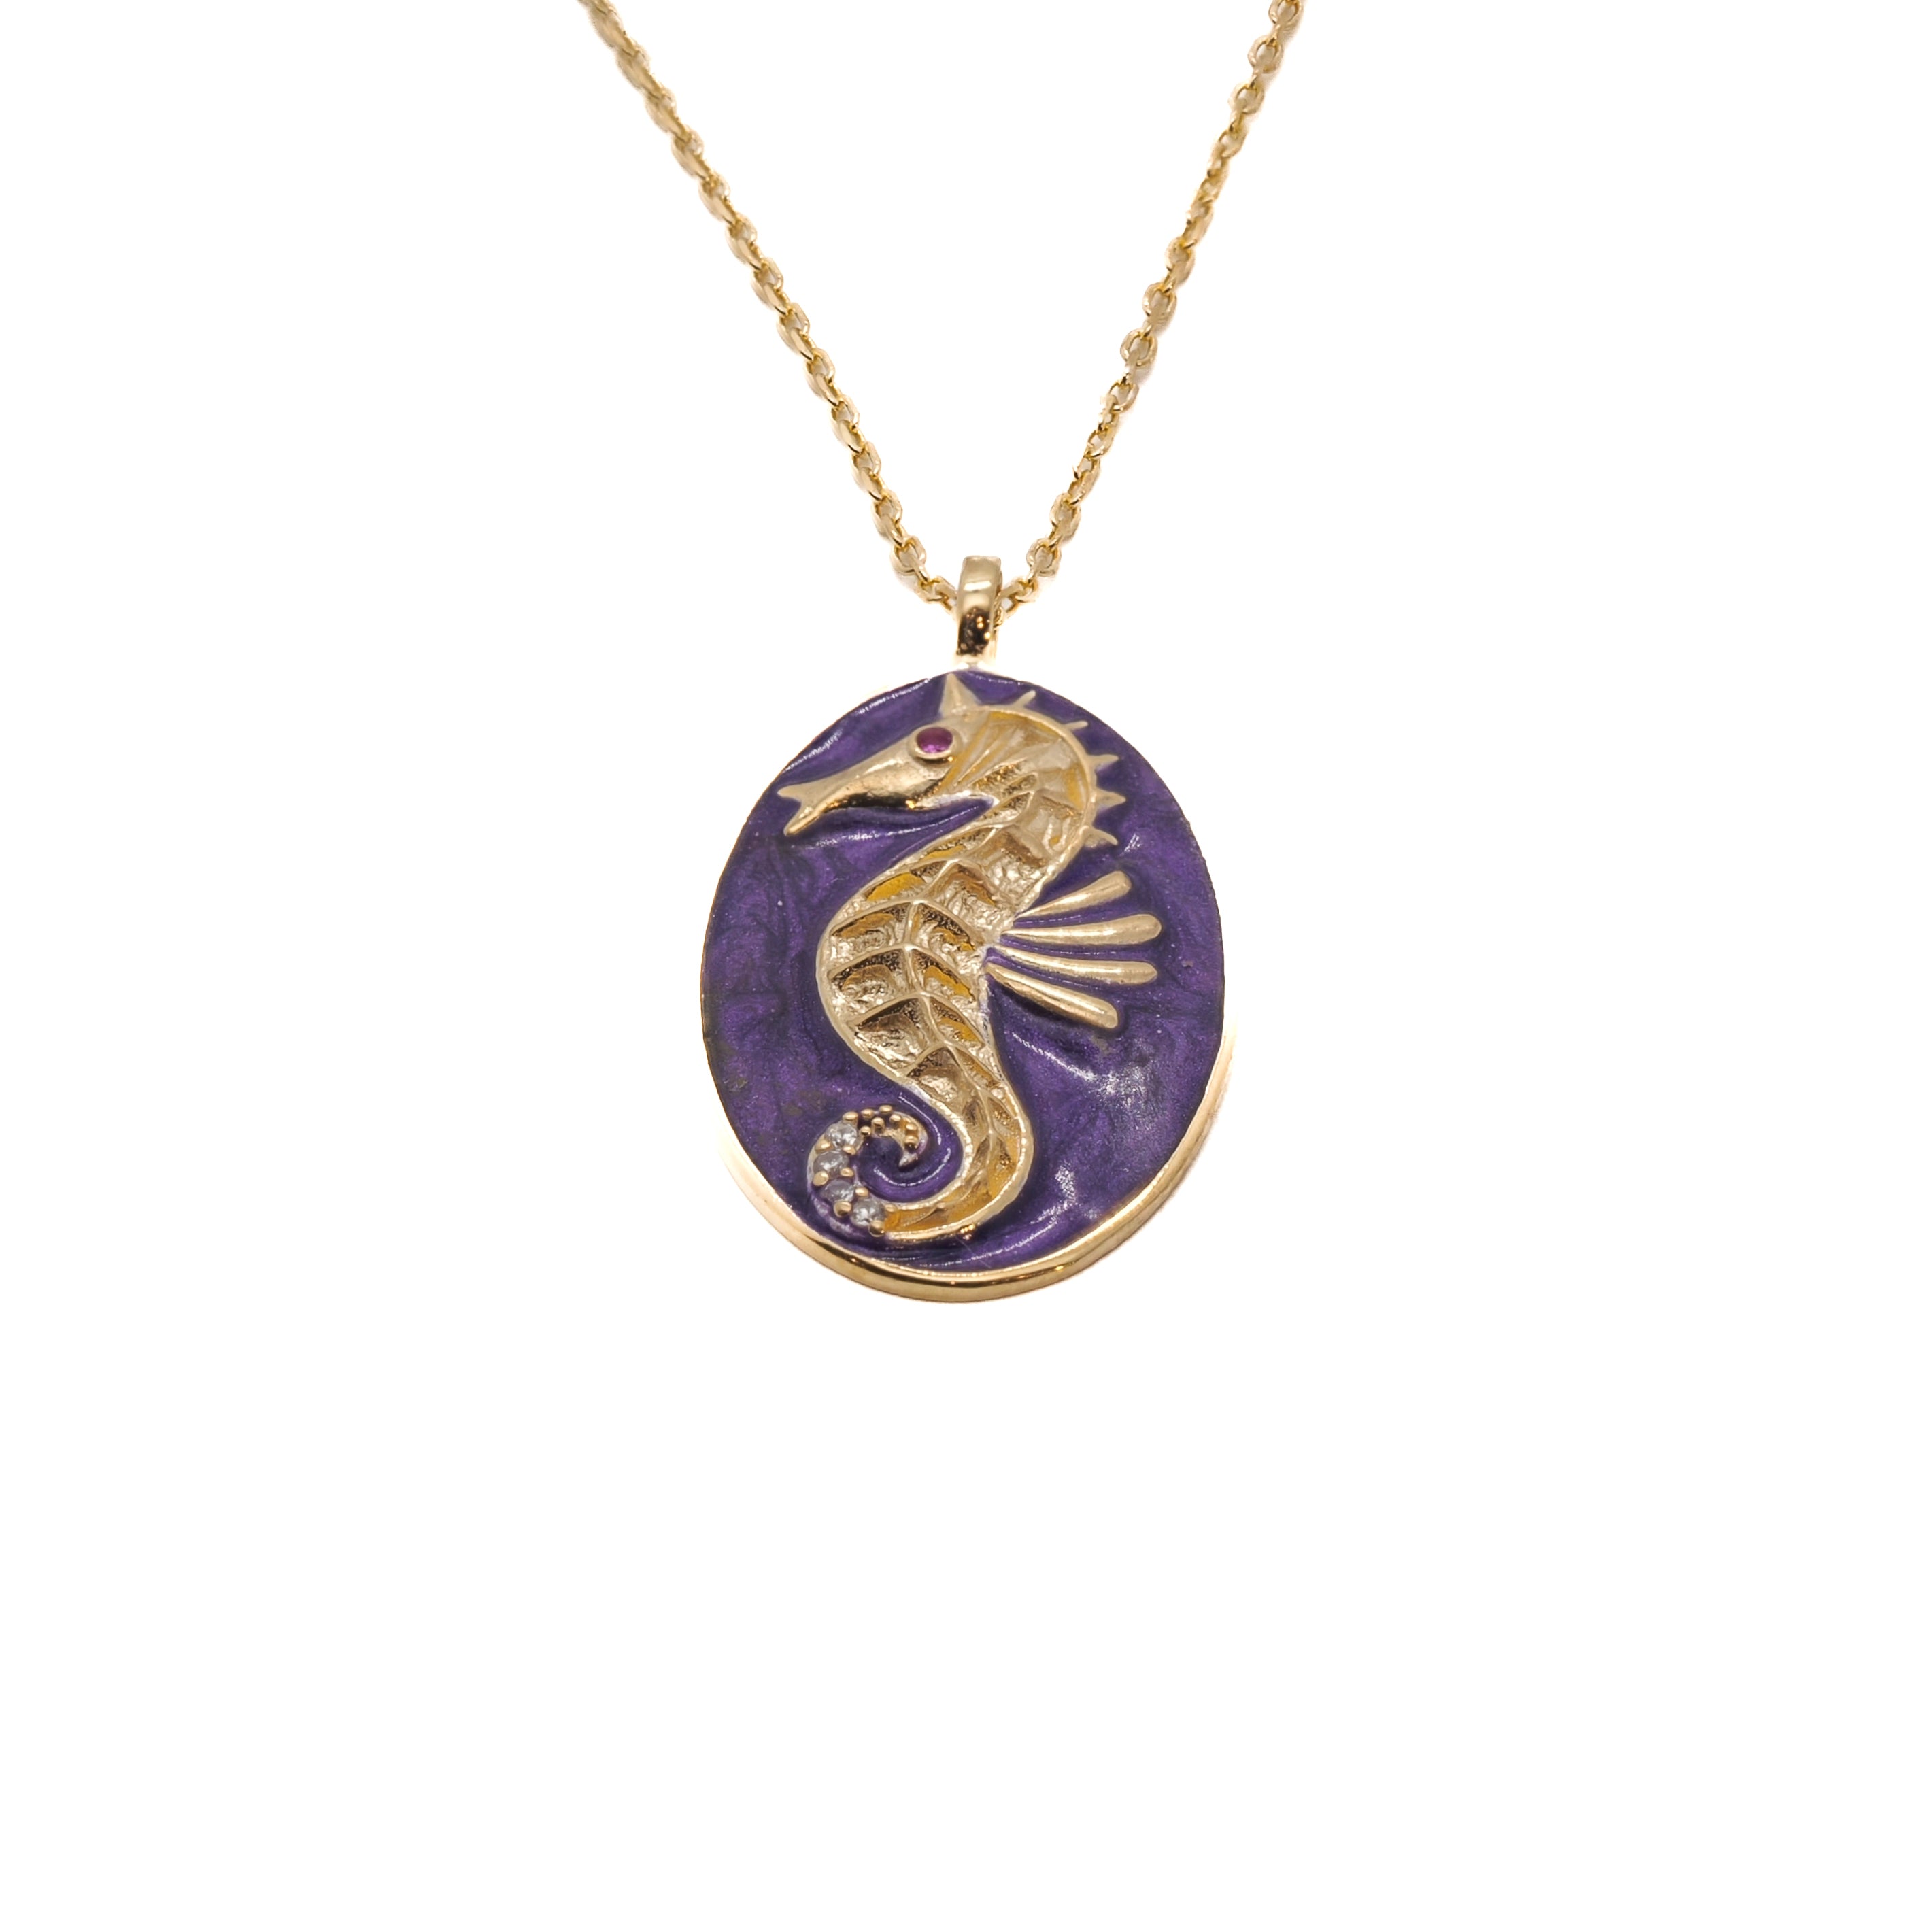 A close-up of the Spirit Animal Seahorse Necklace, showcasing the expert craftsmanship and stunning gold-plated seahorse pendant.